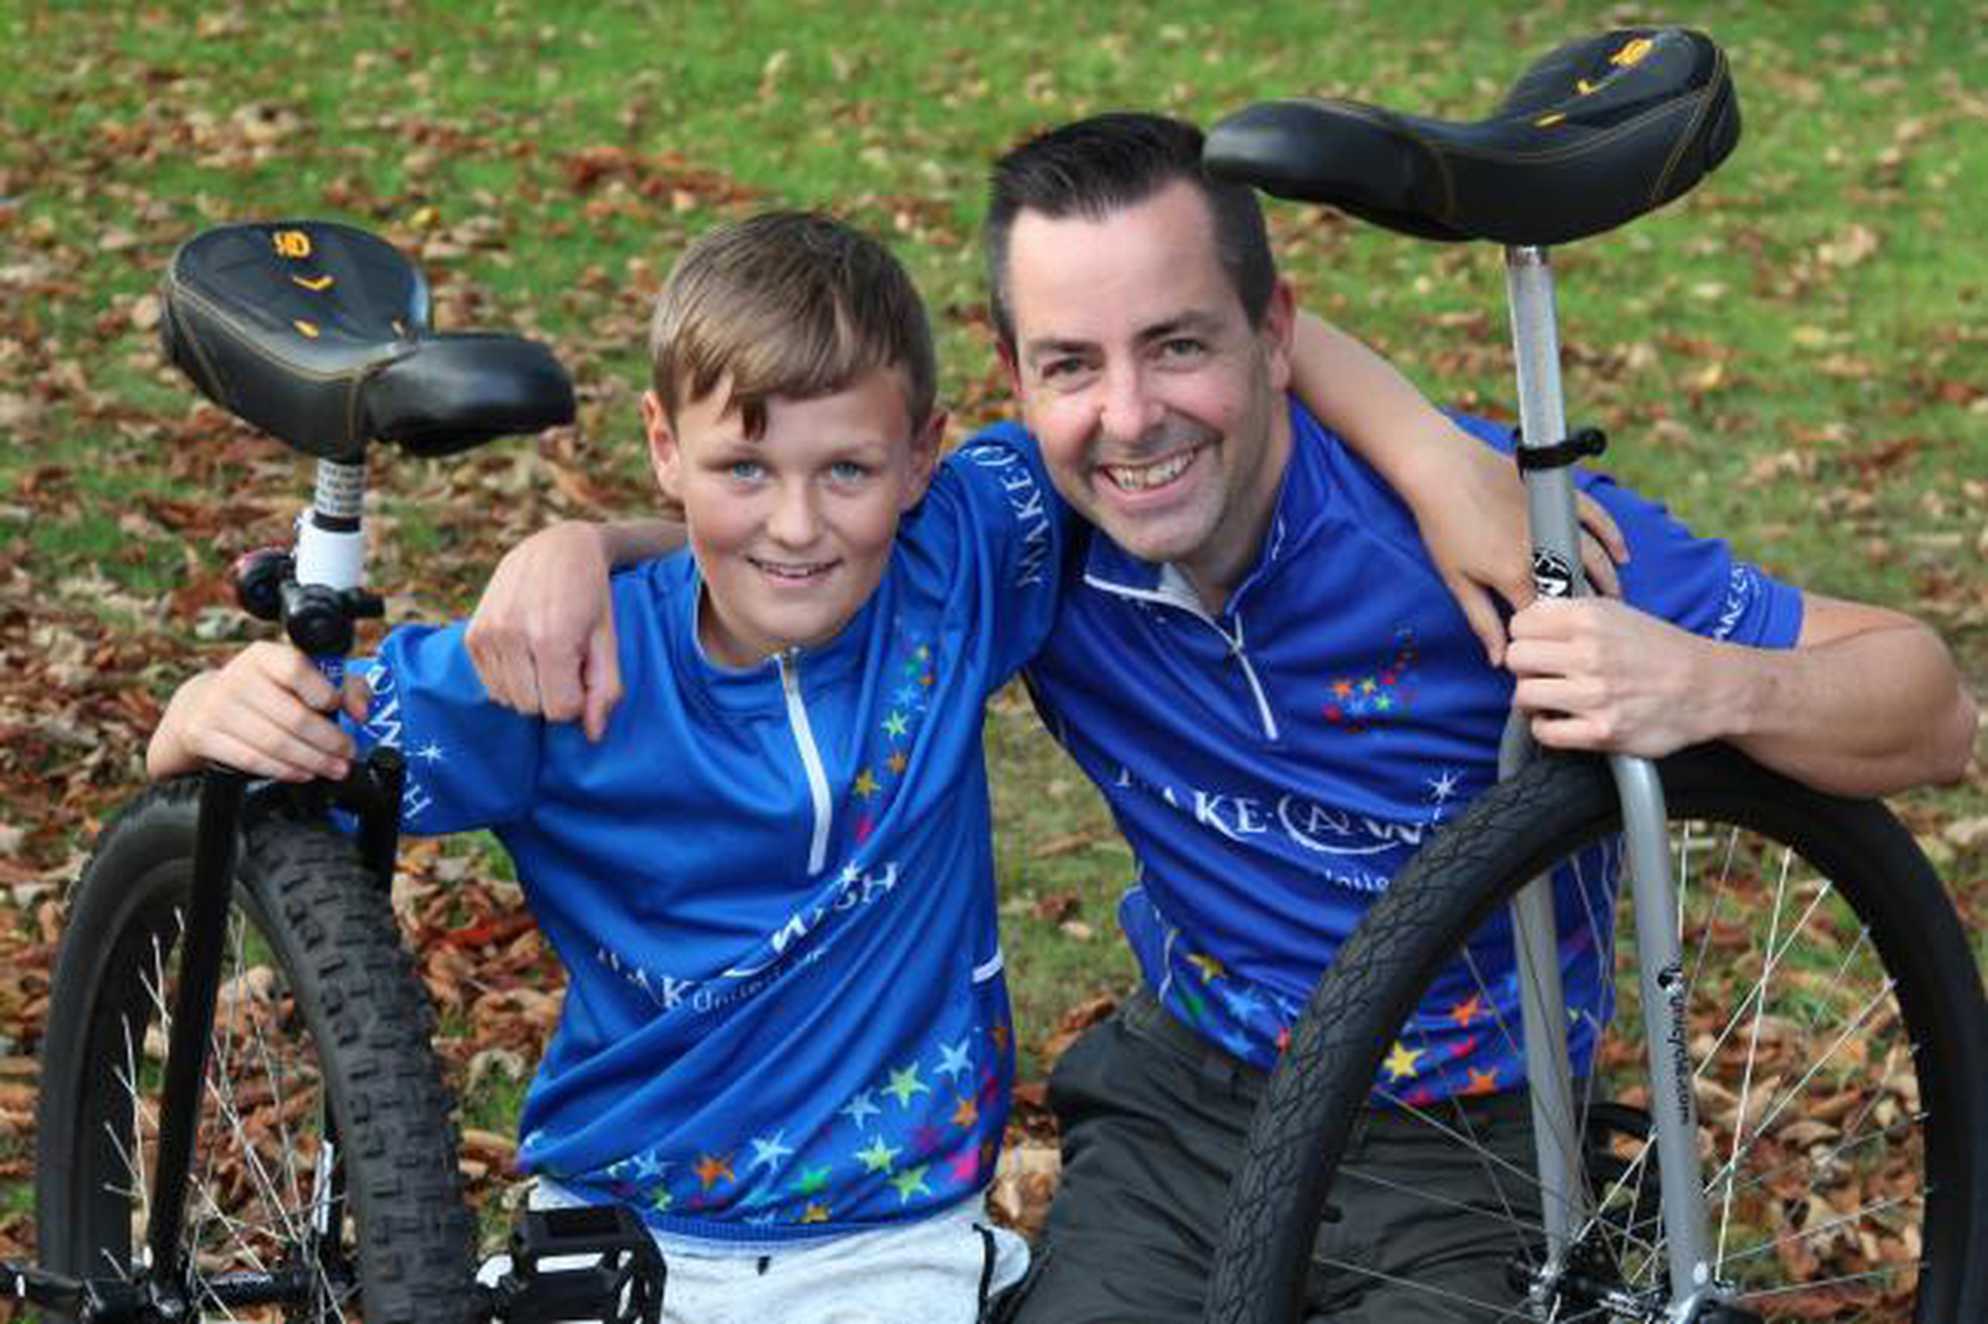 Two of our #WishHeroes with the unicycles they used during their fundraising challenge.